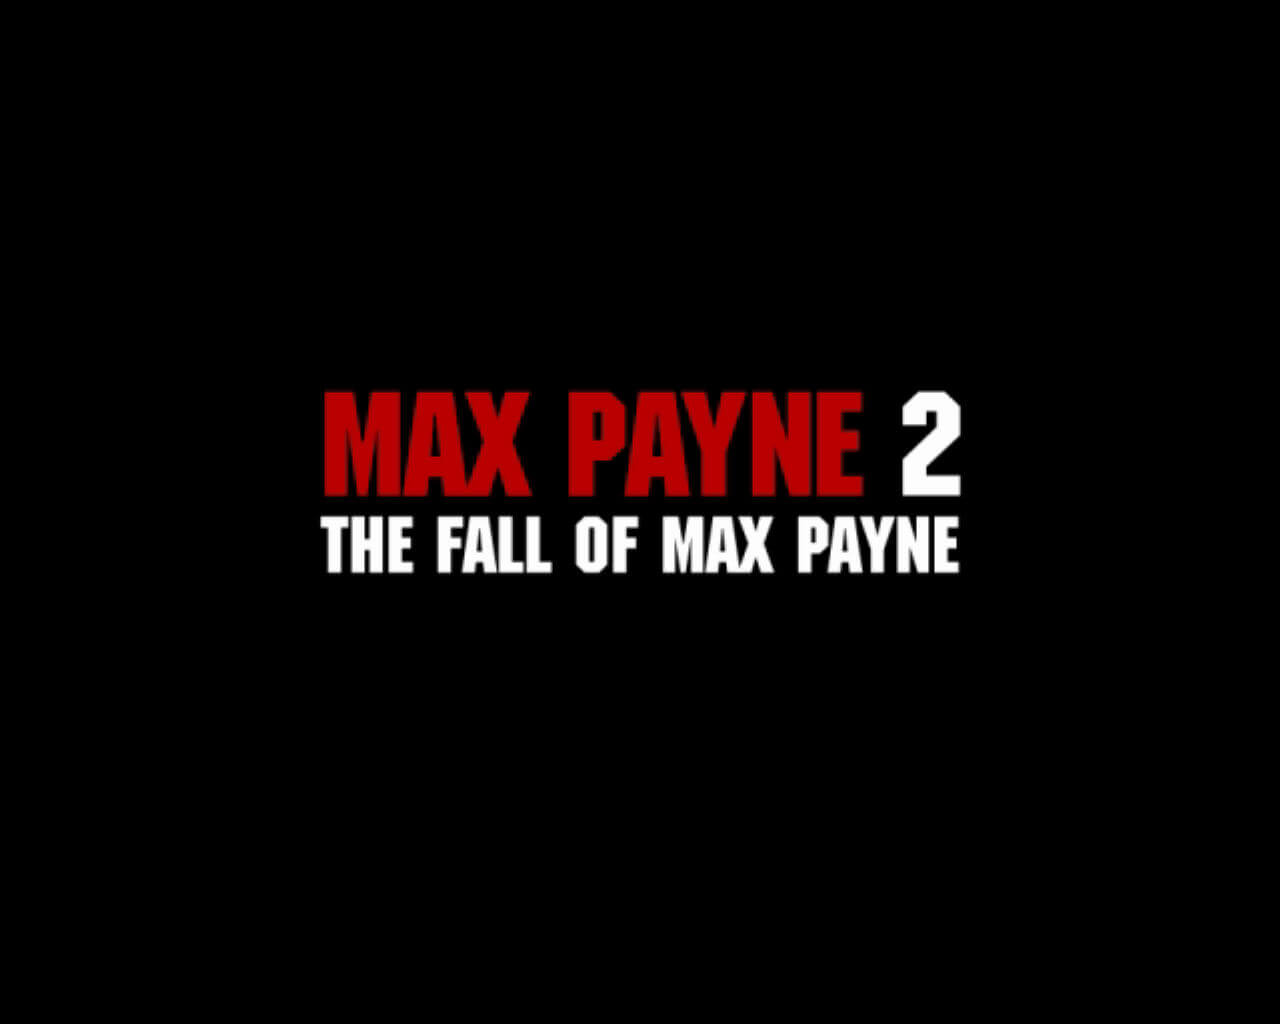 Max Payne official promotional image - MobyGames